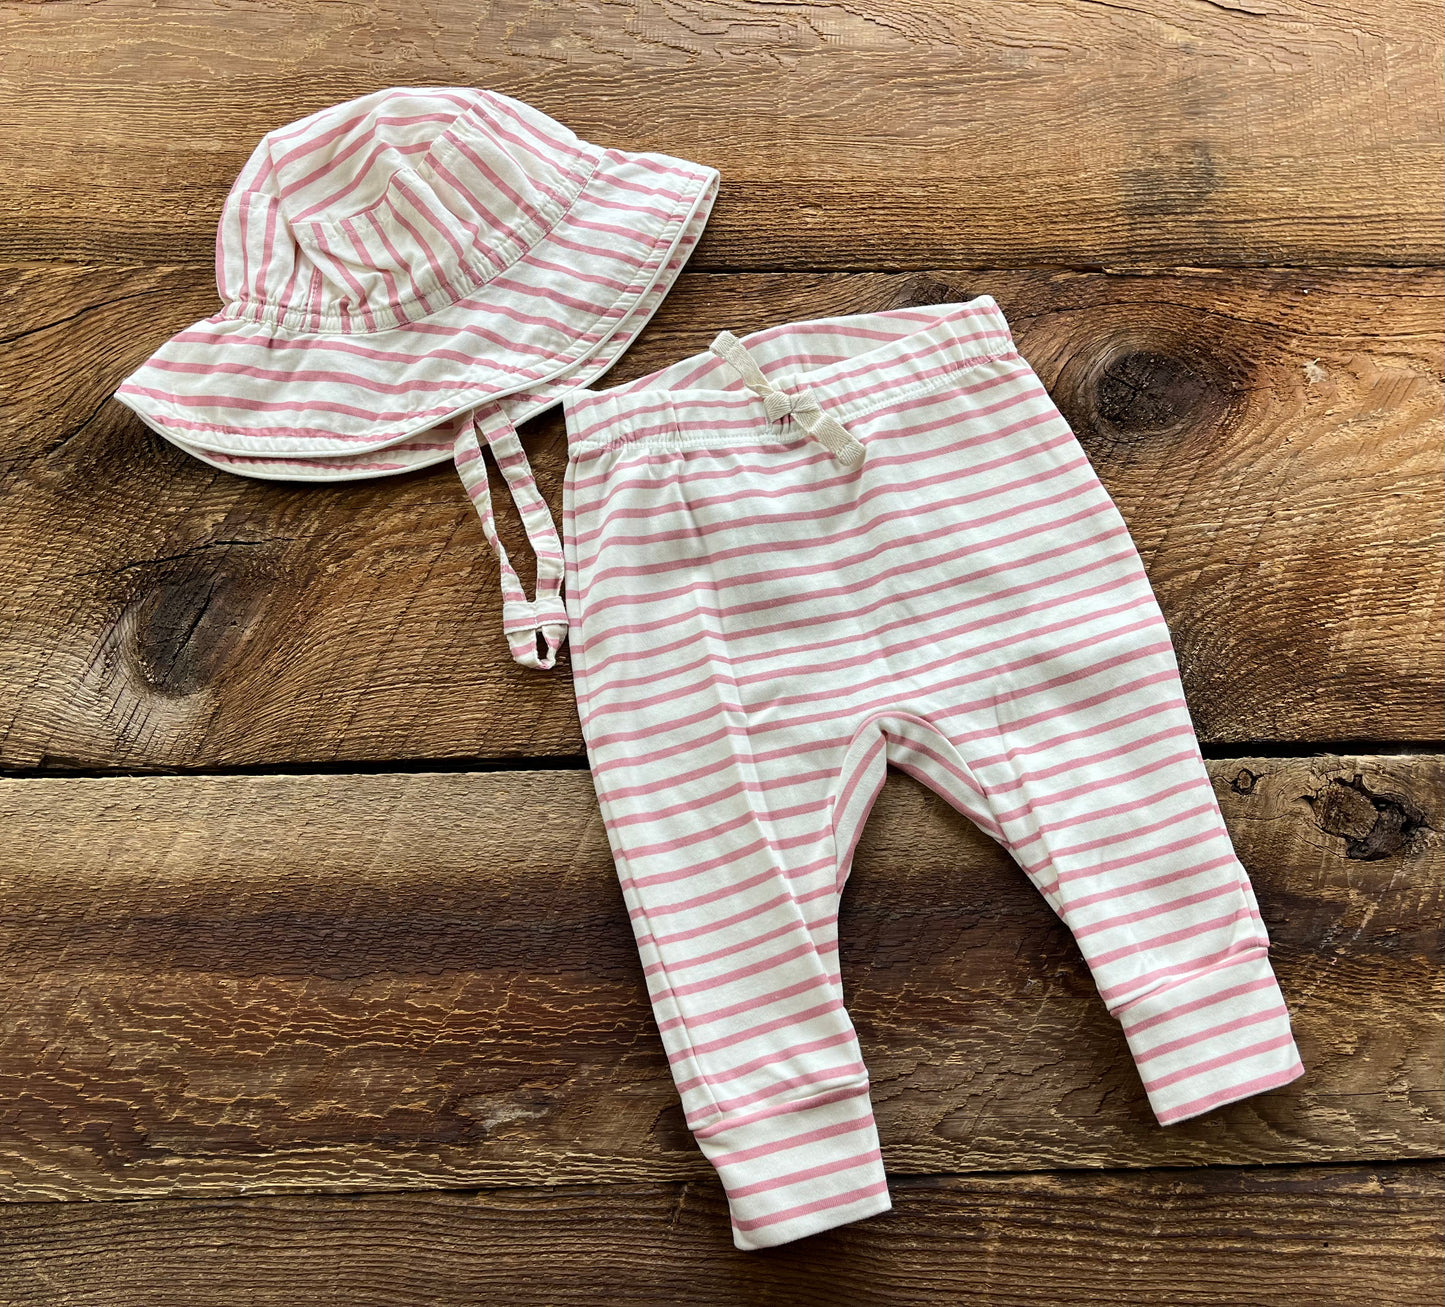 Pehr 0-3M Striped Outfit